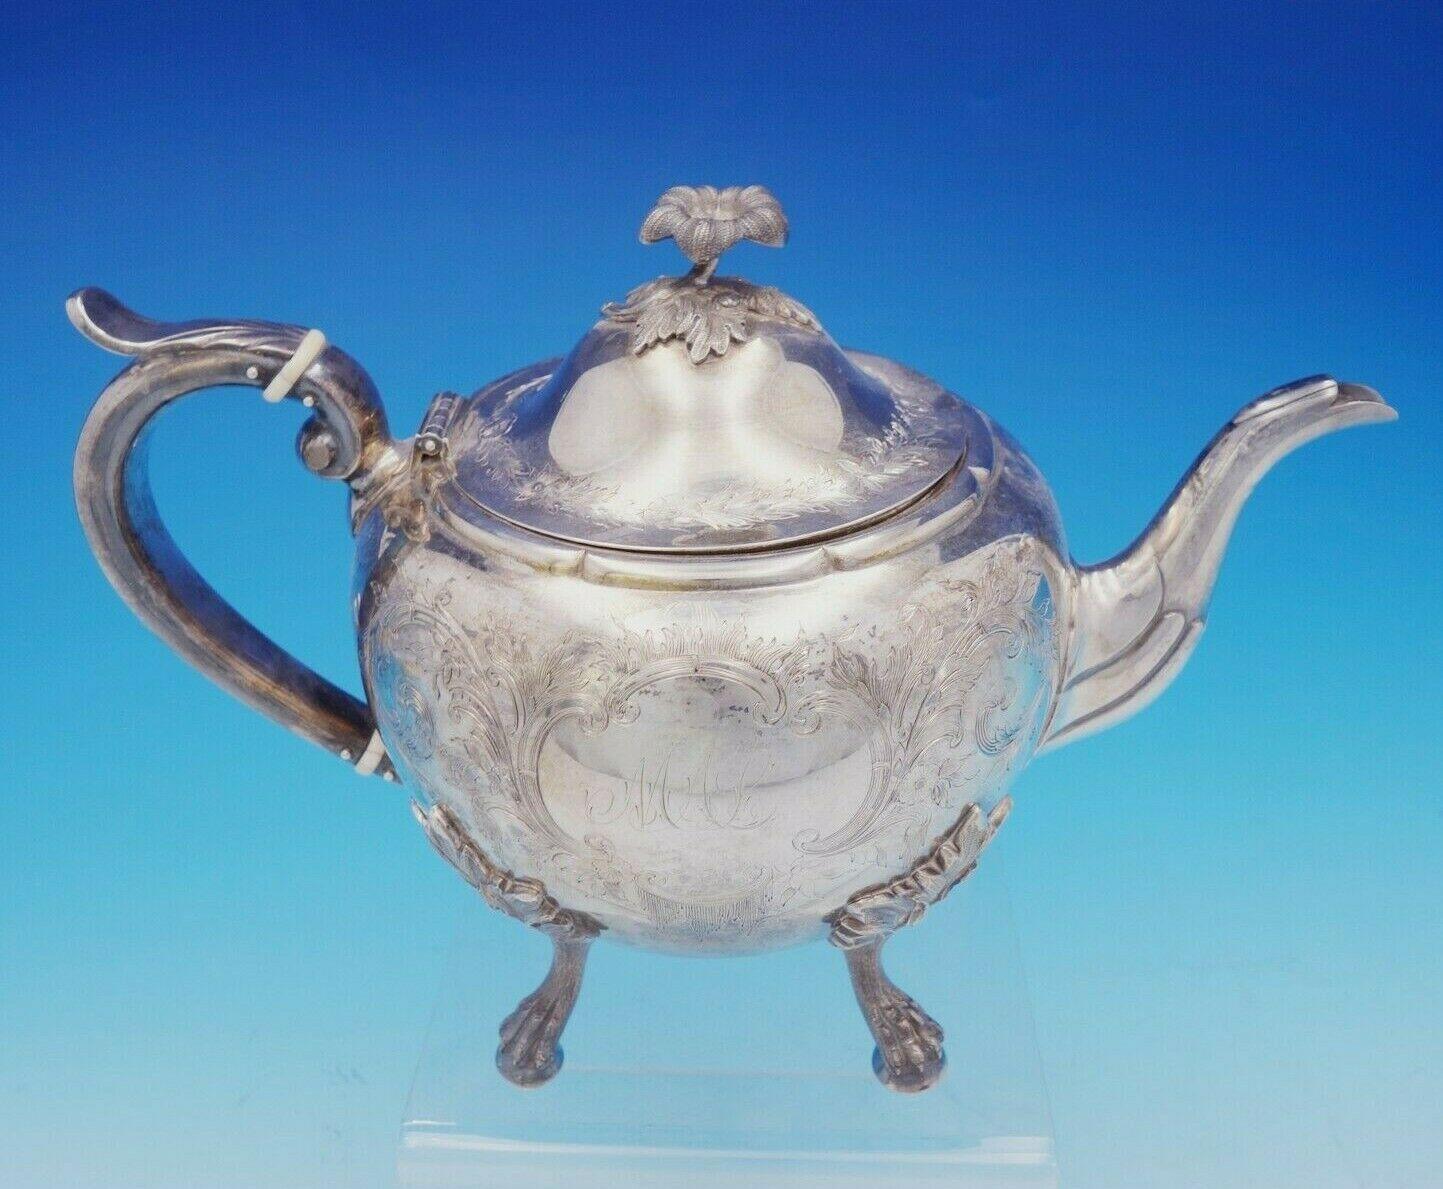 Bigelow Kennard

Elegant Bigelow Kennard coin silver 5-piece tea set circa 1845-63, made in Boston. It features bright-cut scrollwork with flowers, applied leaf and lion paw with ball feet, and 3-D flower finials. This set includes:

2 - Tea pot: